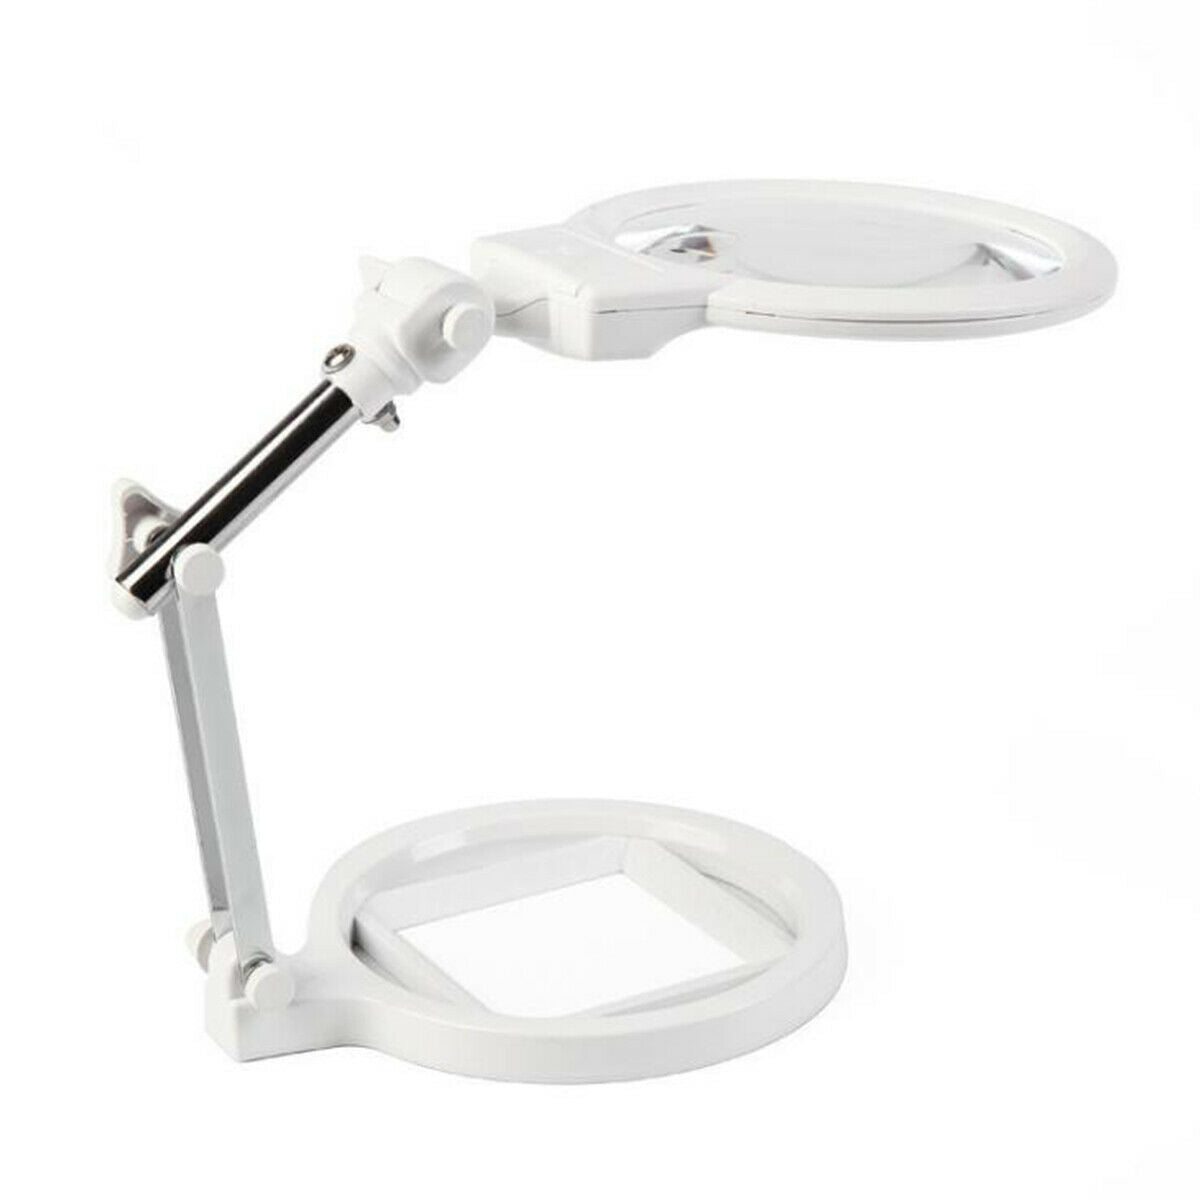 LED Desk Lamp Magnifying Magnifier Glass With Light Stand Clamp for Craft Read